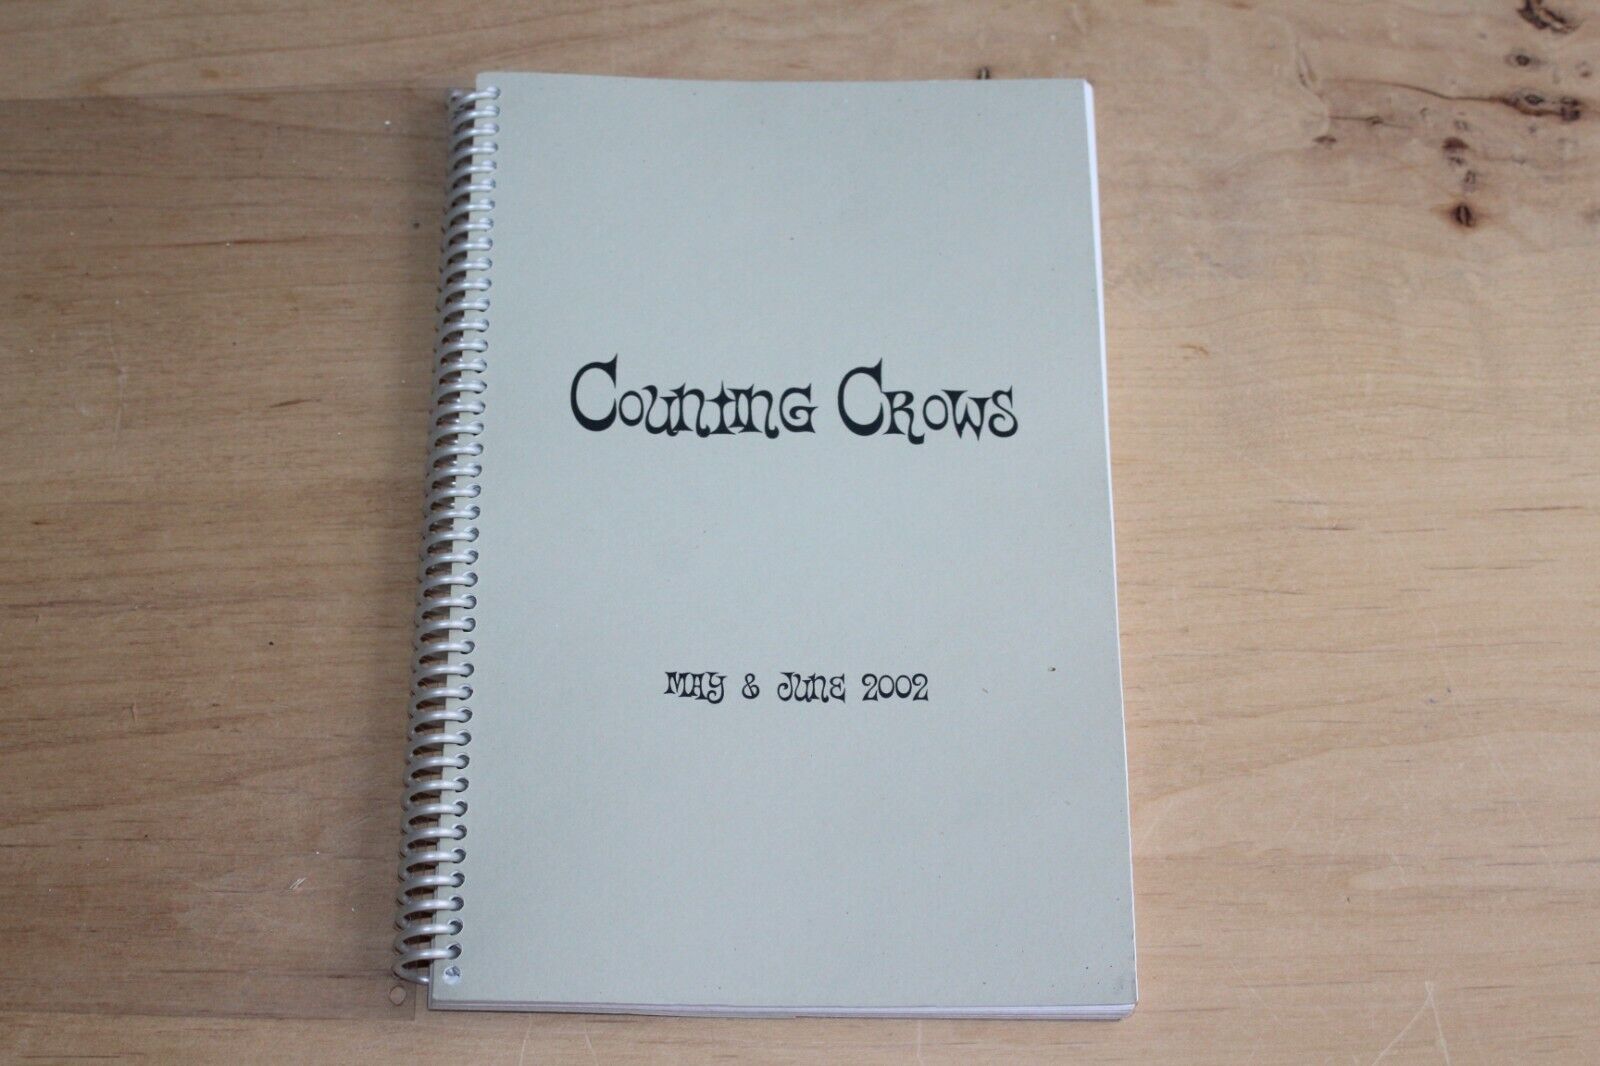 Counting Crows  / Tour Itinerary / May June  2002